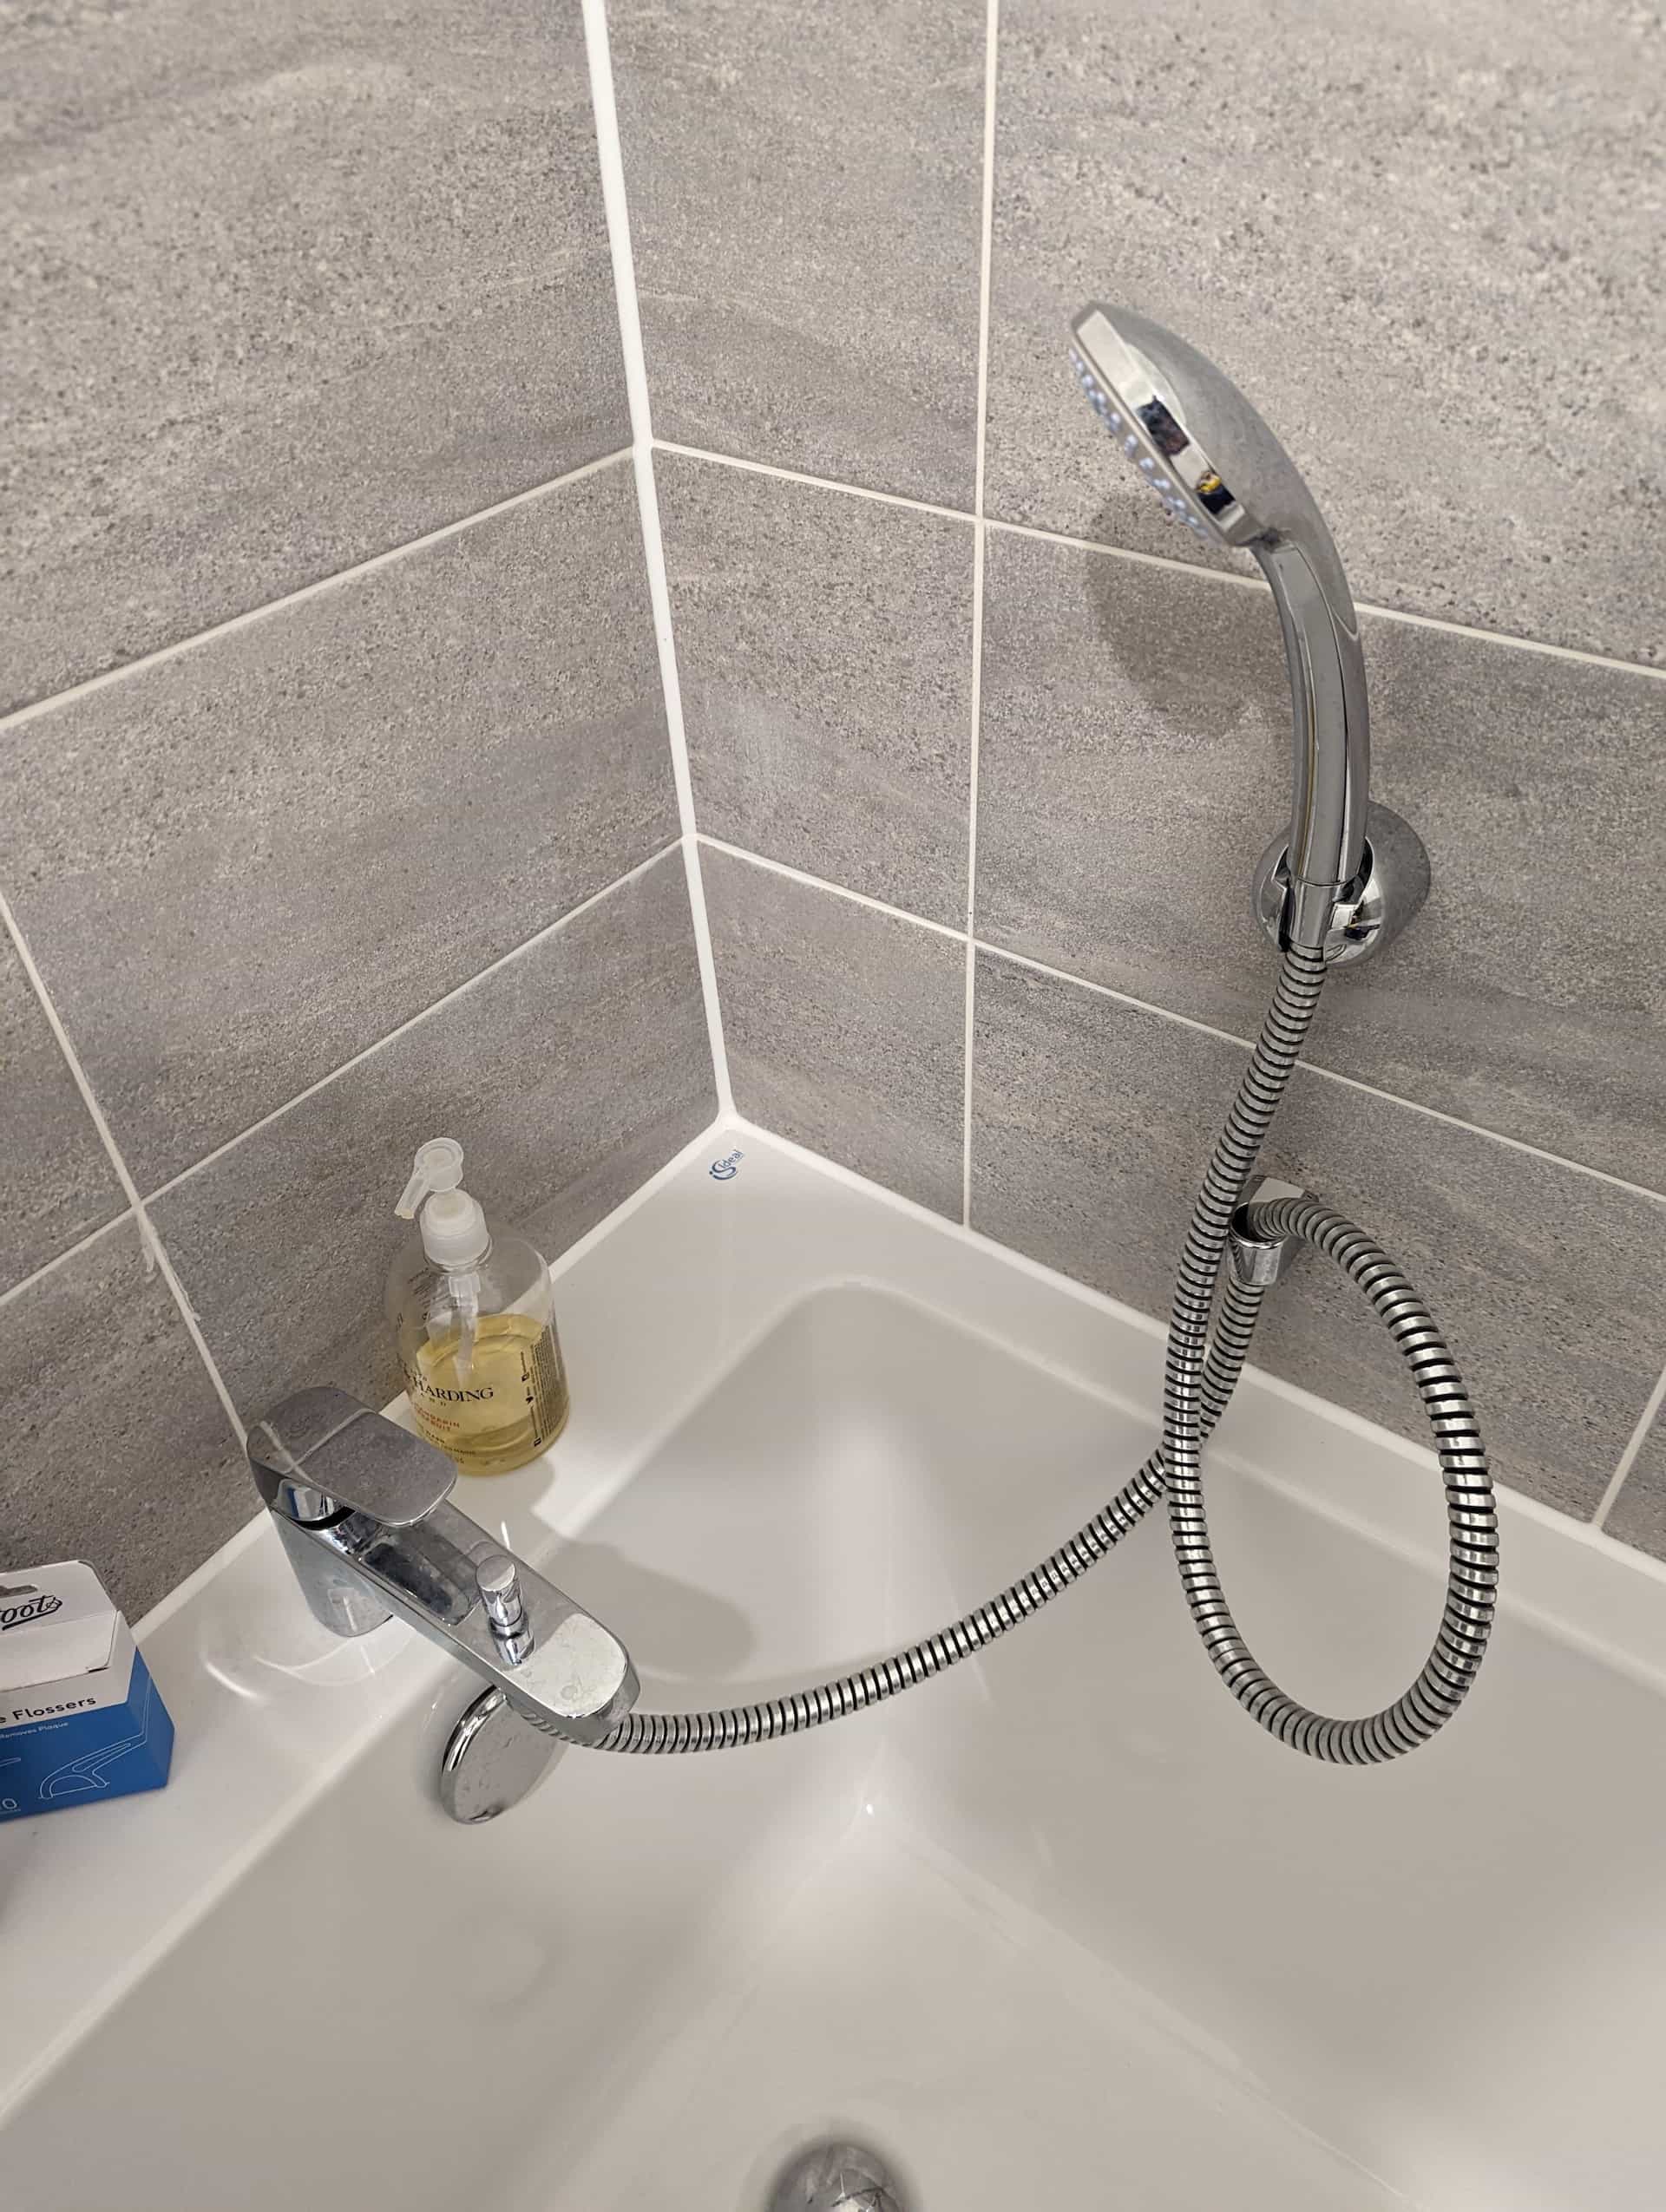 Picture of the corner of a bathtub showing the tap with the shower hose coming off of it. On the side wall there's a loop that fixes the hose to the wall, and above that is a cradle for the shower head to hold it when not in use. You can not take the hose out of the loop.